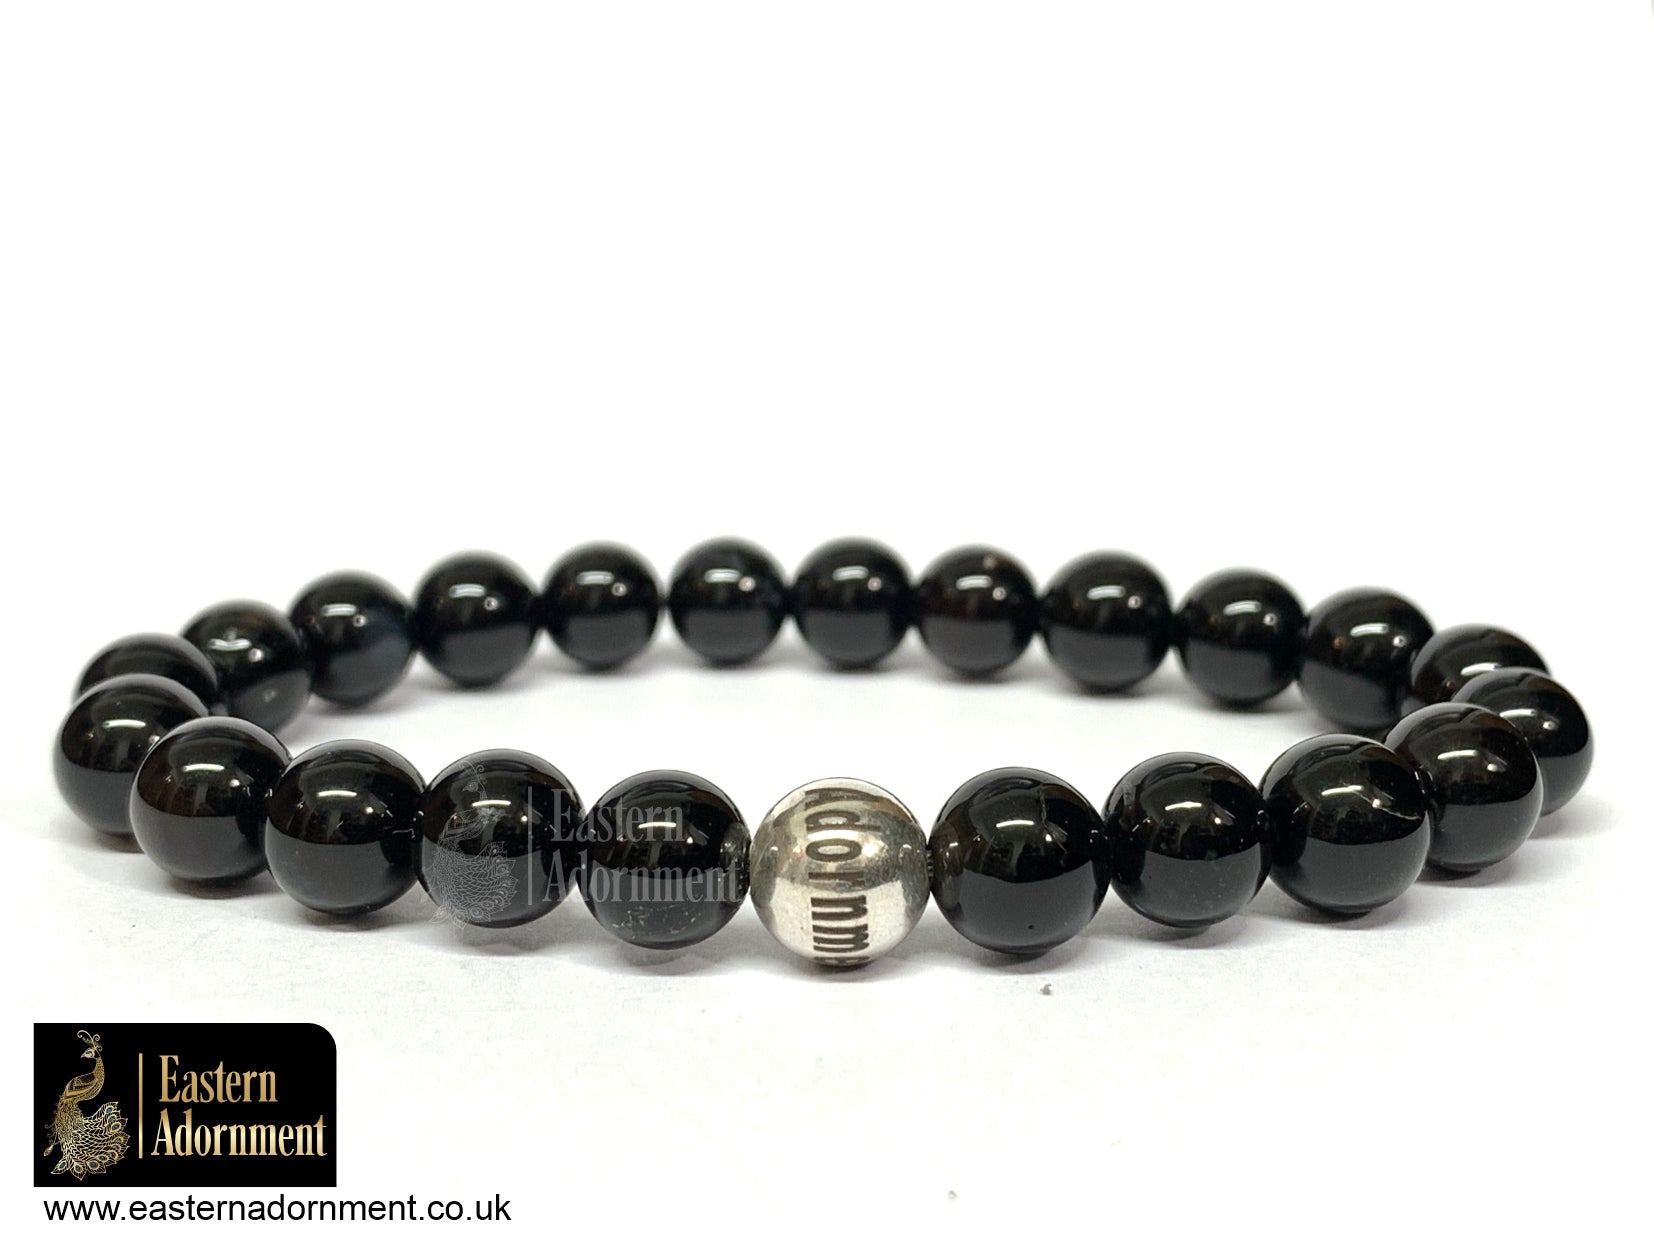 Black Onyx Bead Bracelet with Eastern Adornment branded silver bead.